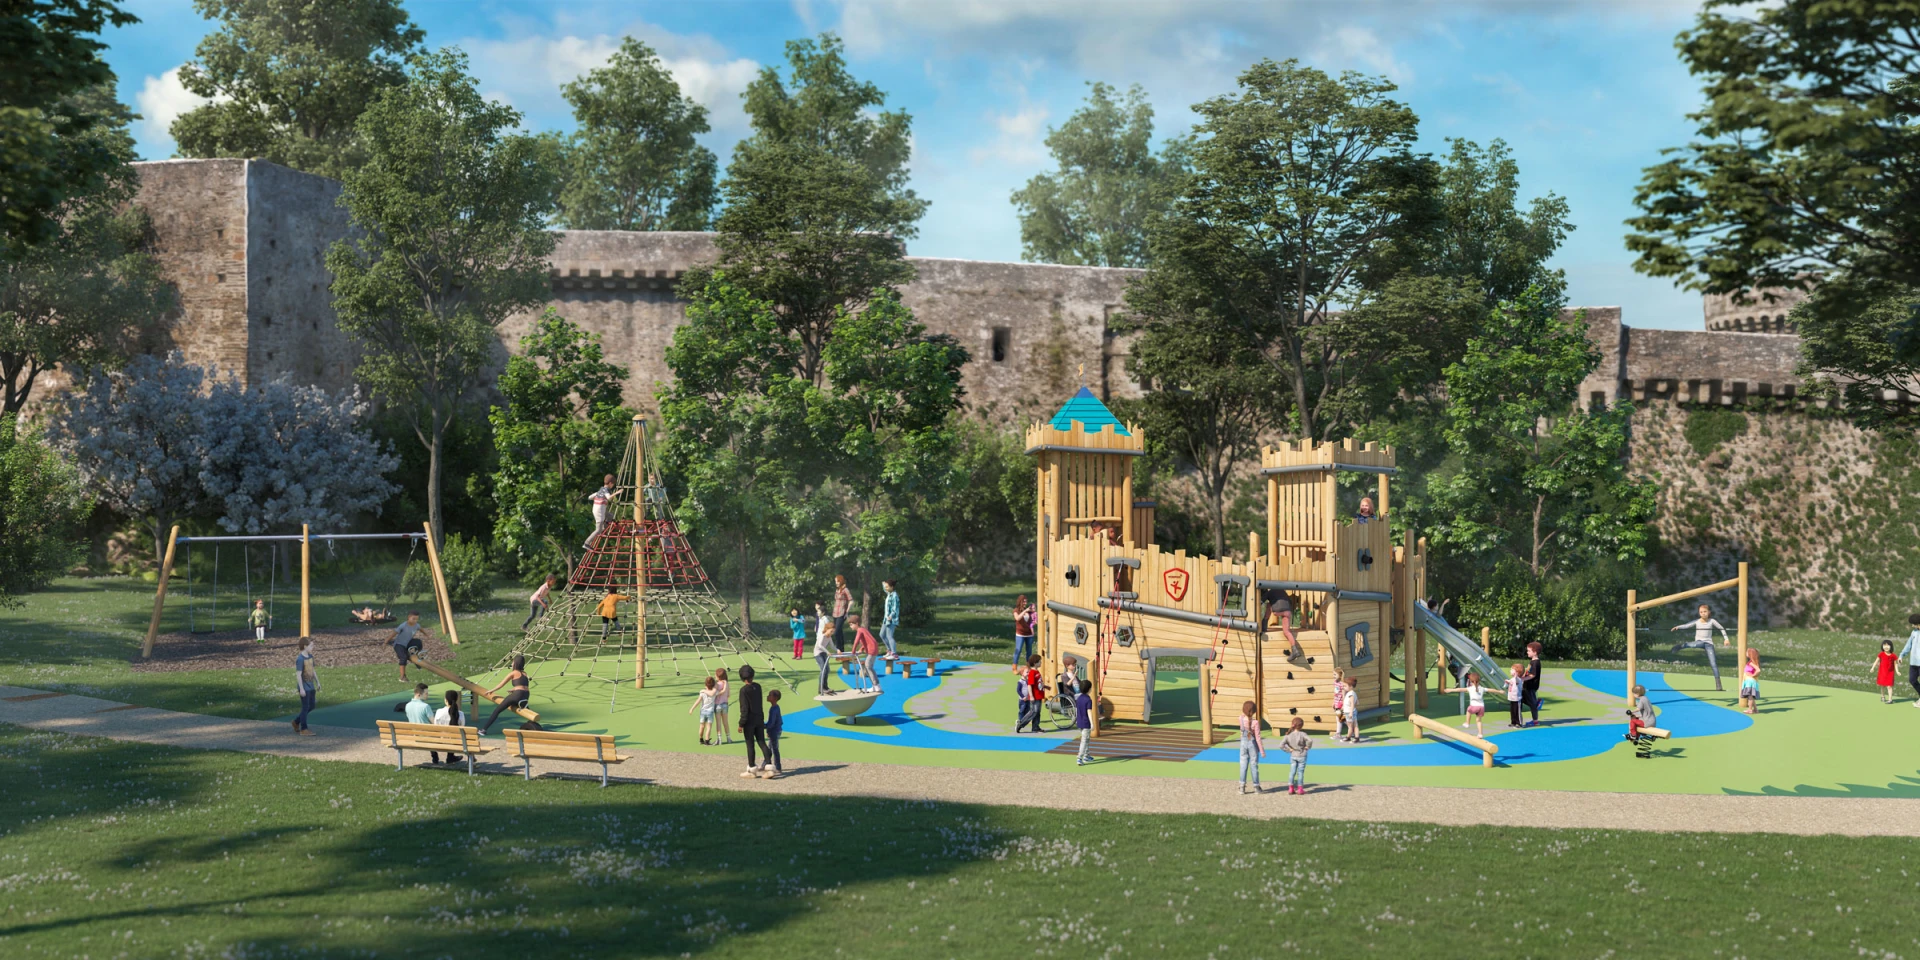 Playground design idea of a wooden castle in a park